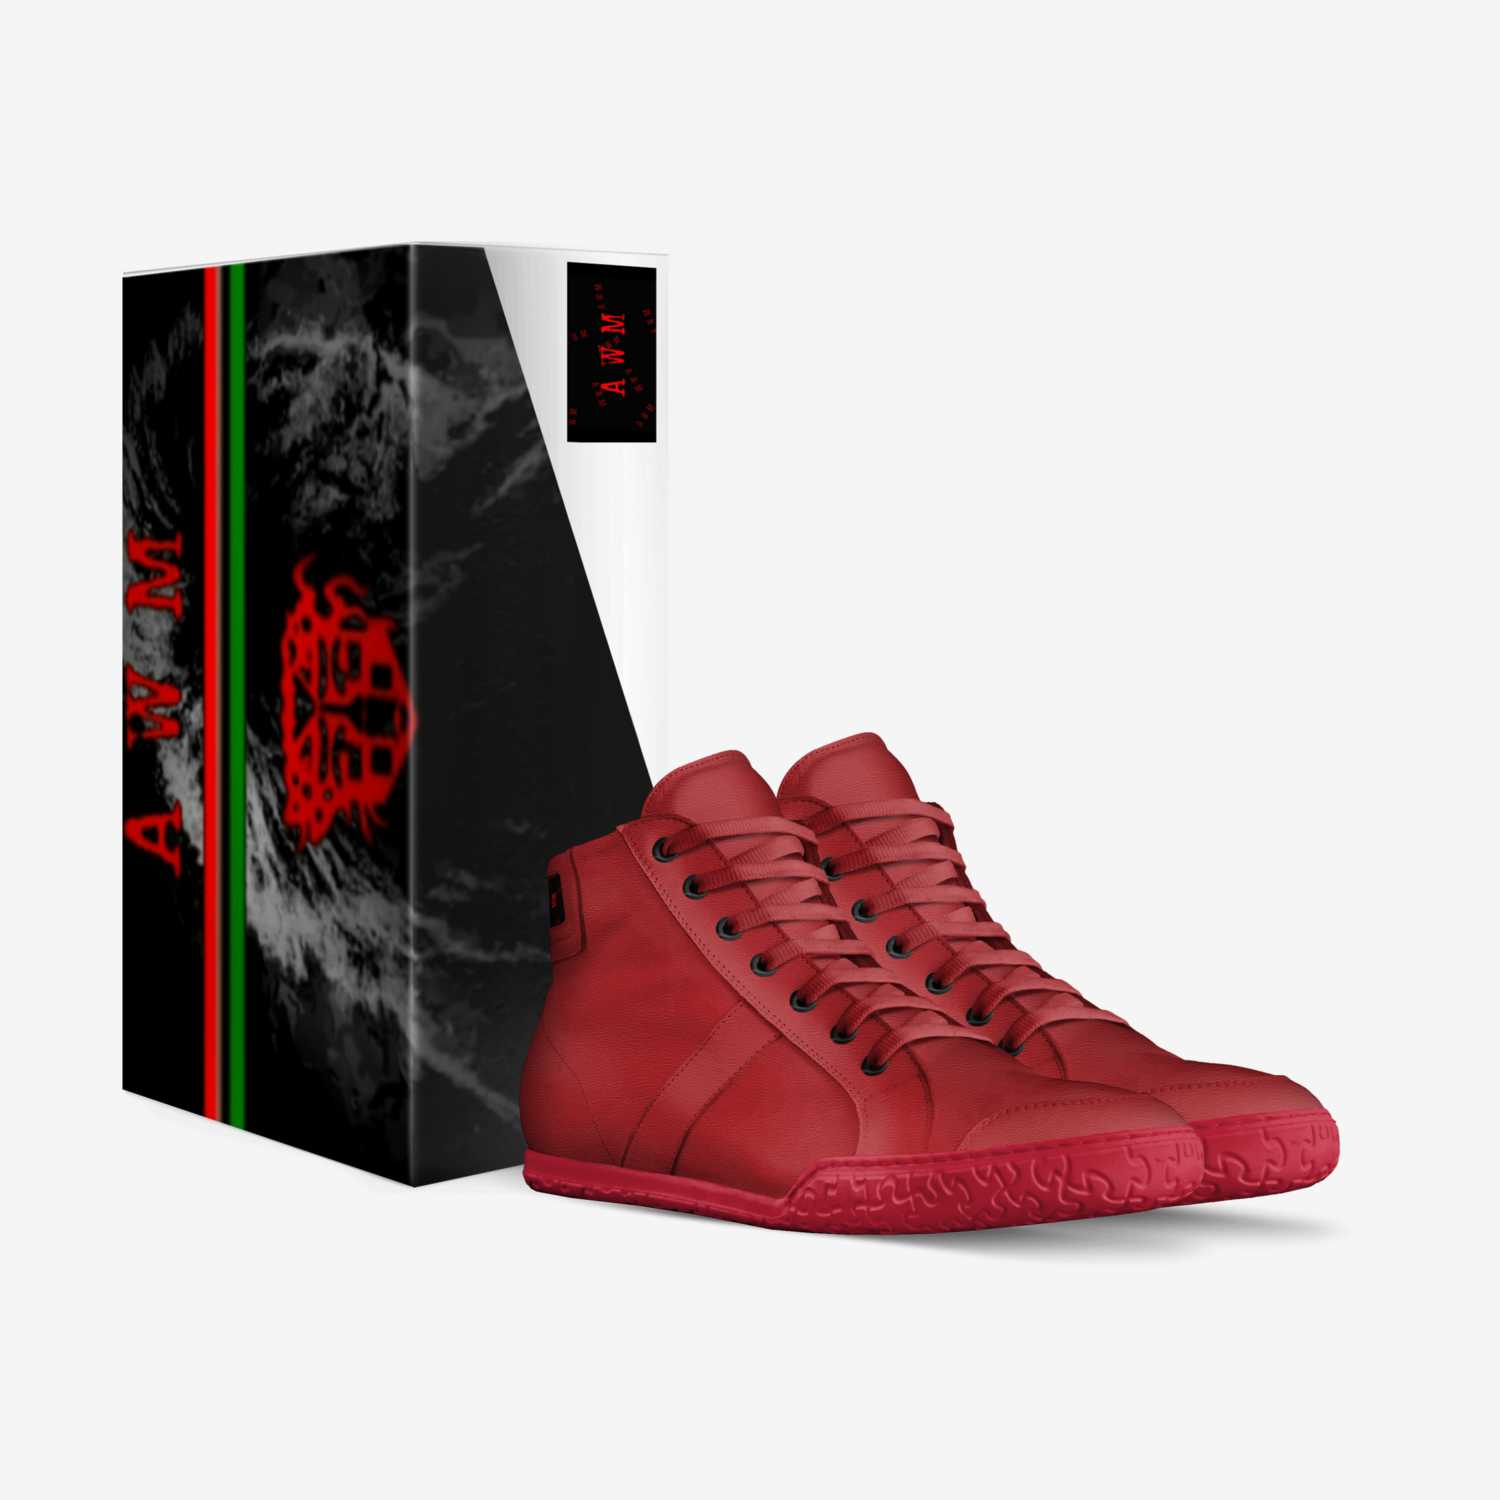 awm custom made in Italy shoes by African War Mask | Box view